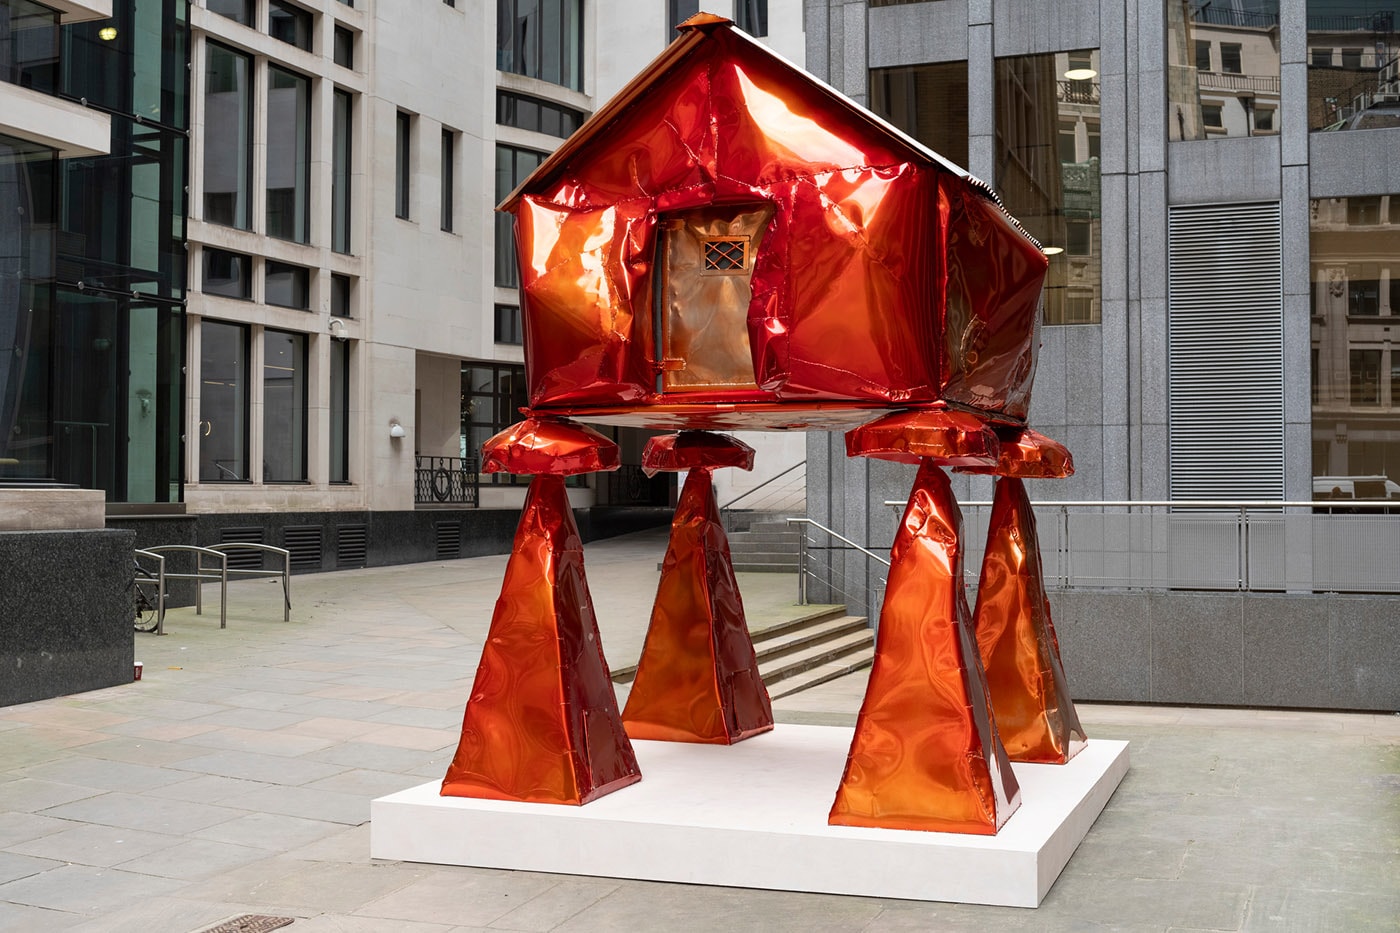 Sculptures Installed Across London's Square Mile Sculpture in the City